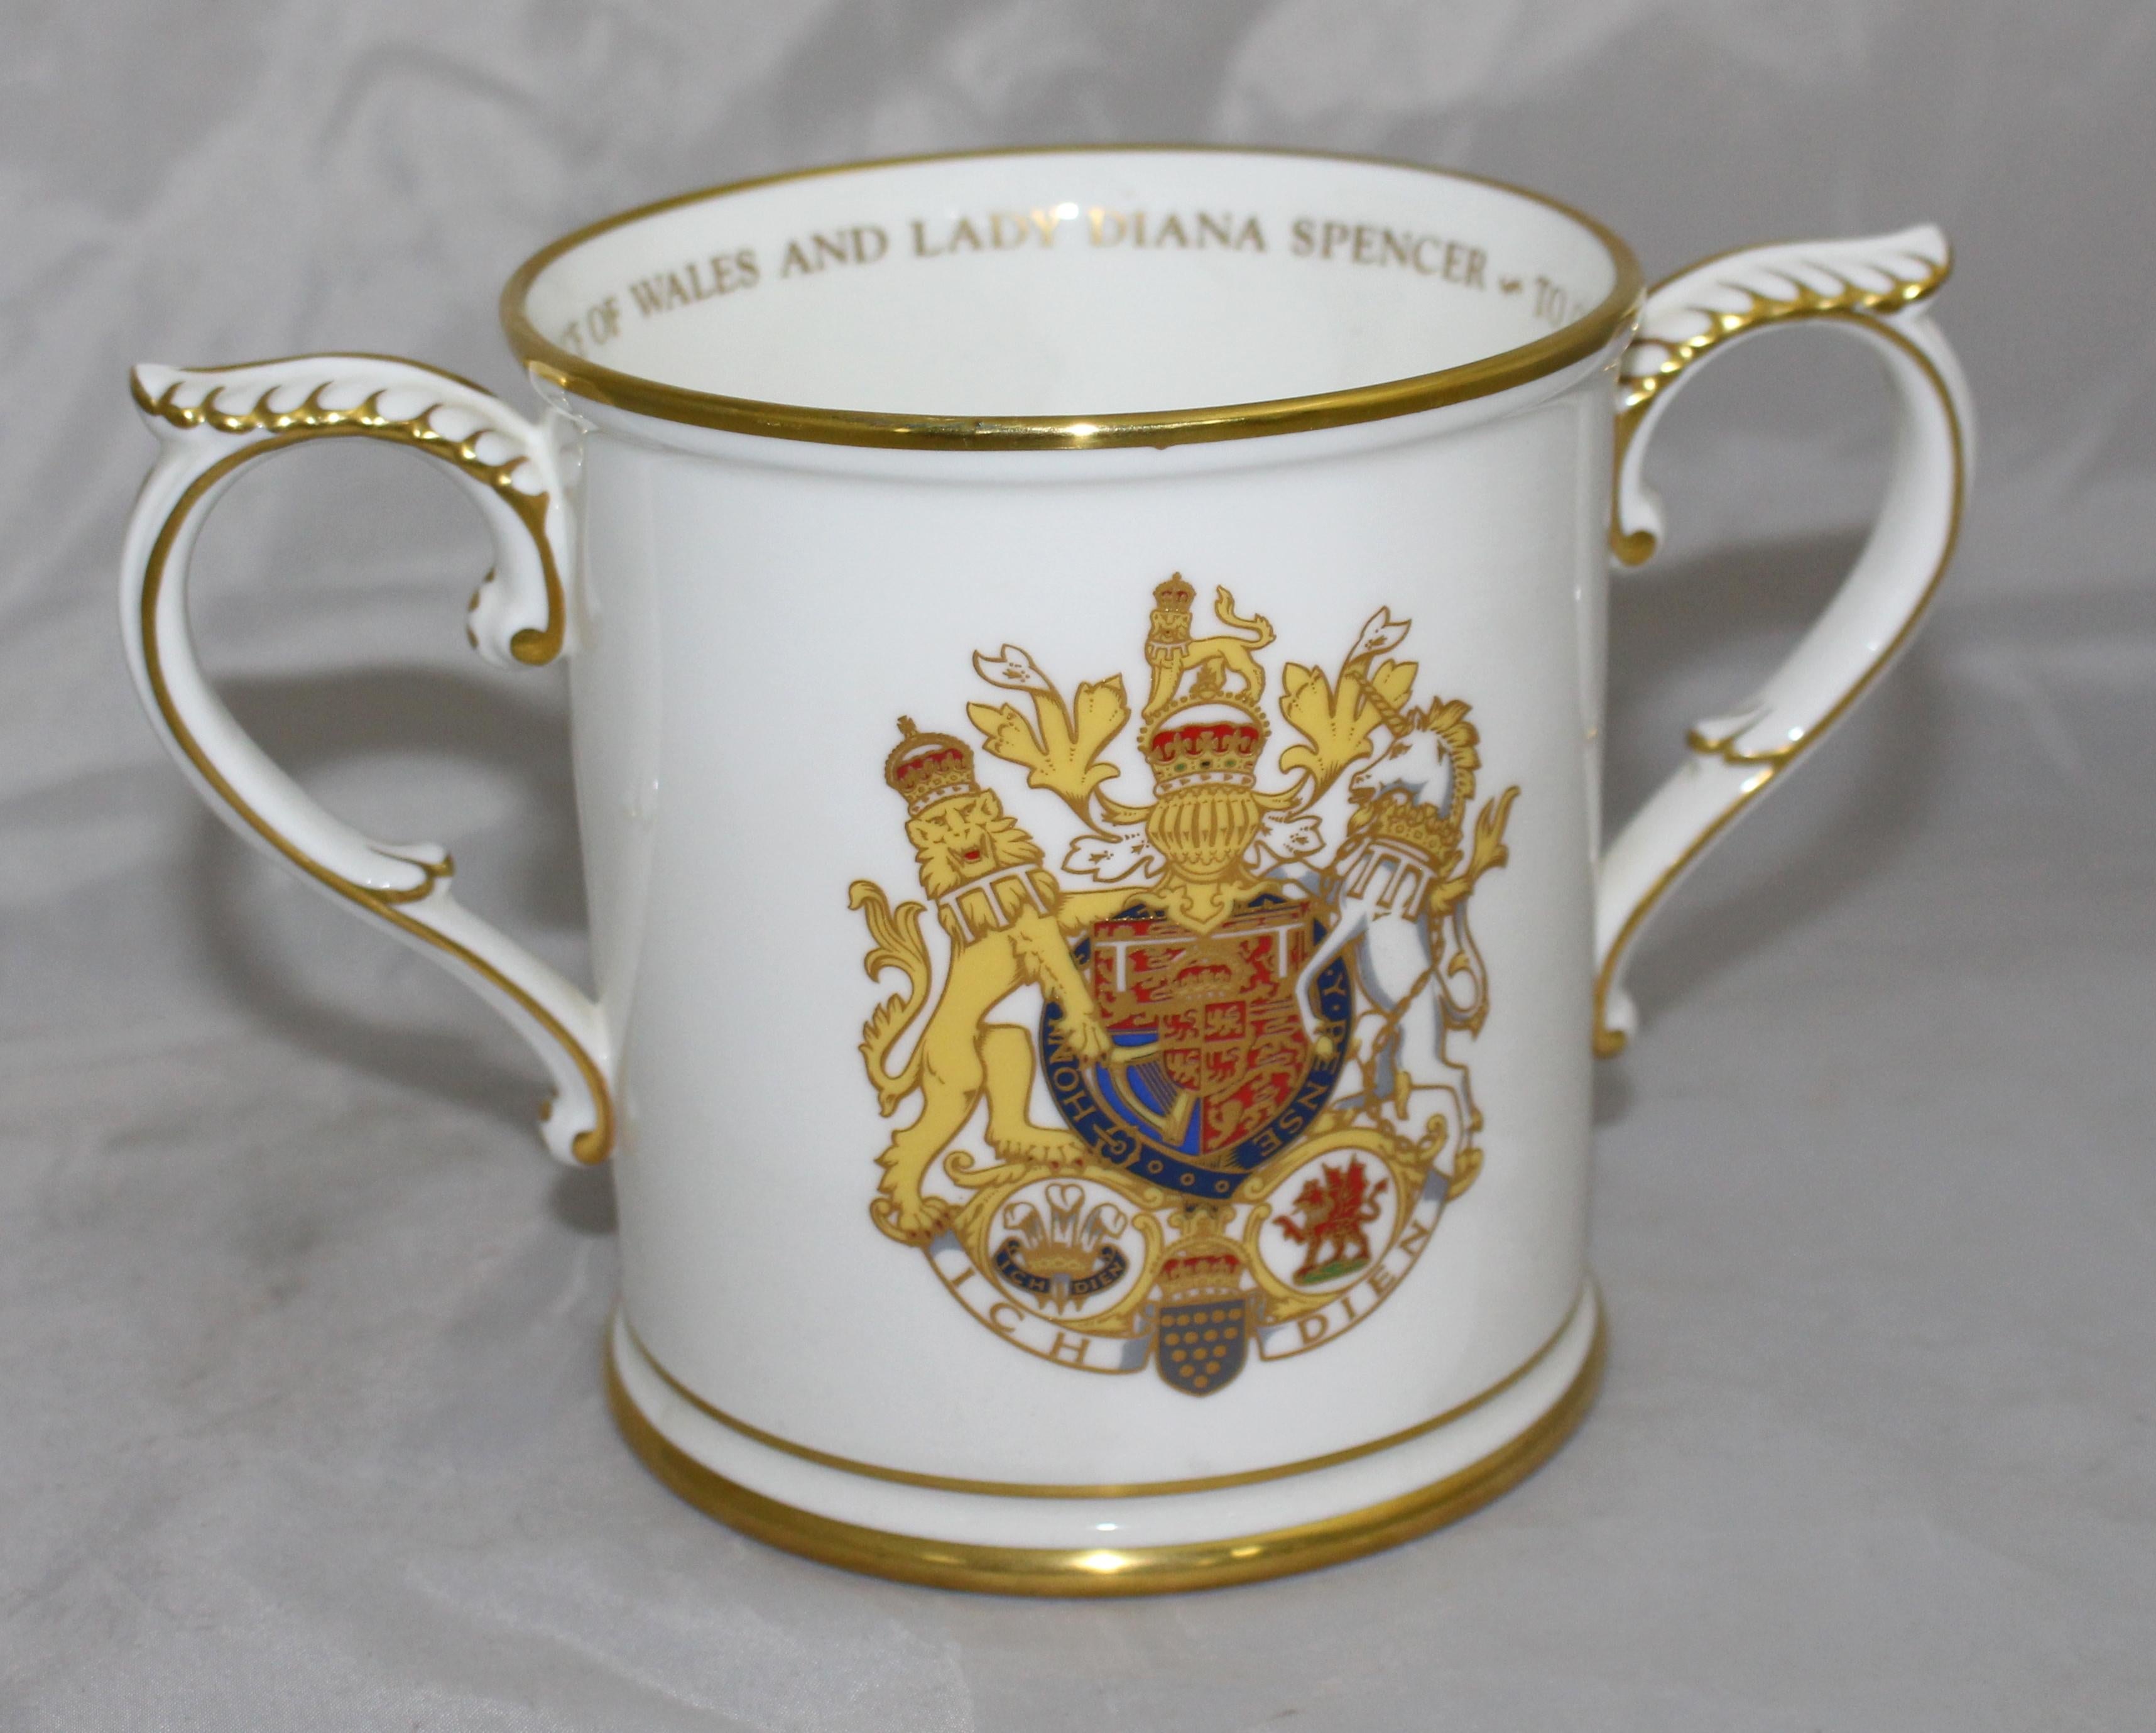 Manufacturer Royal Worcester
Title The Royal Marriage Loving Cup
Date 1981
Measures: Width 19.5 cm / 7 3/4 in
Depth 11.5 cm / 4 1/2 in
Height 12 cm / 4 3/4 in
Limited Edition 1000
Backstamp Fully backstamped, first quality
Condition